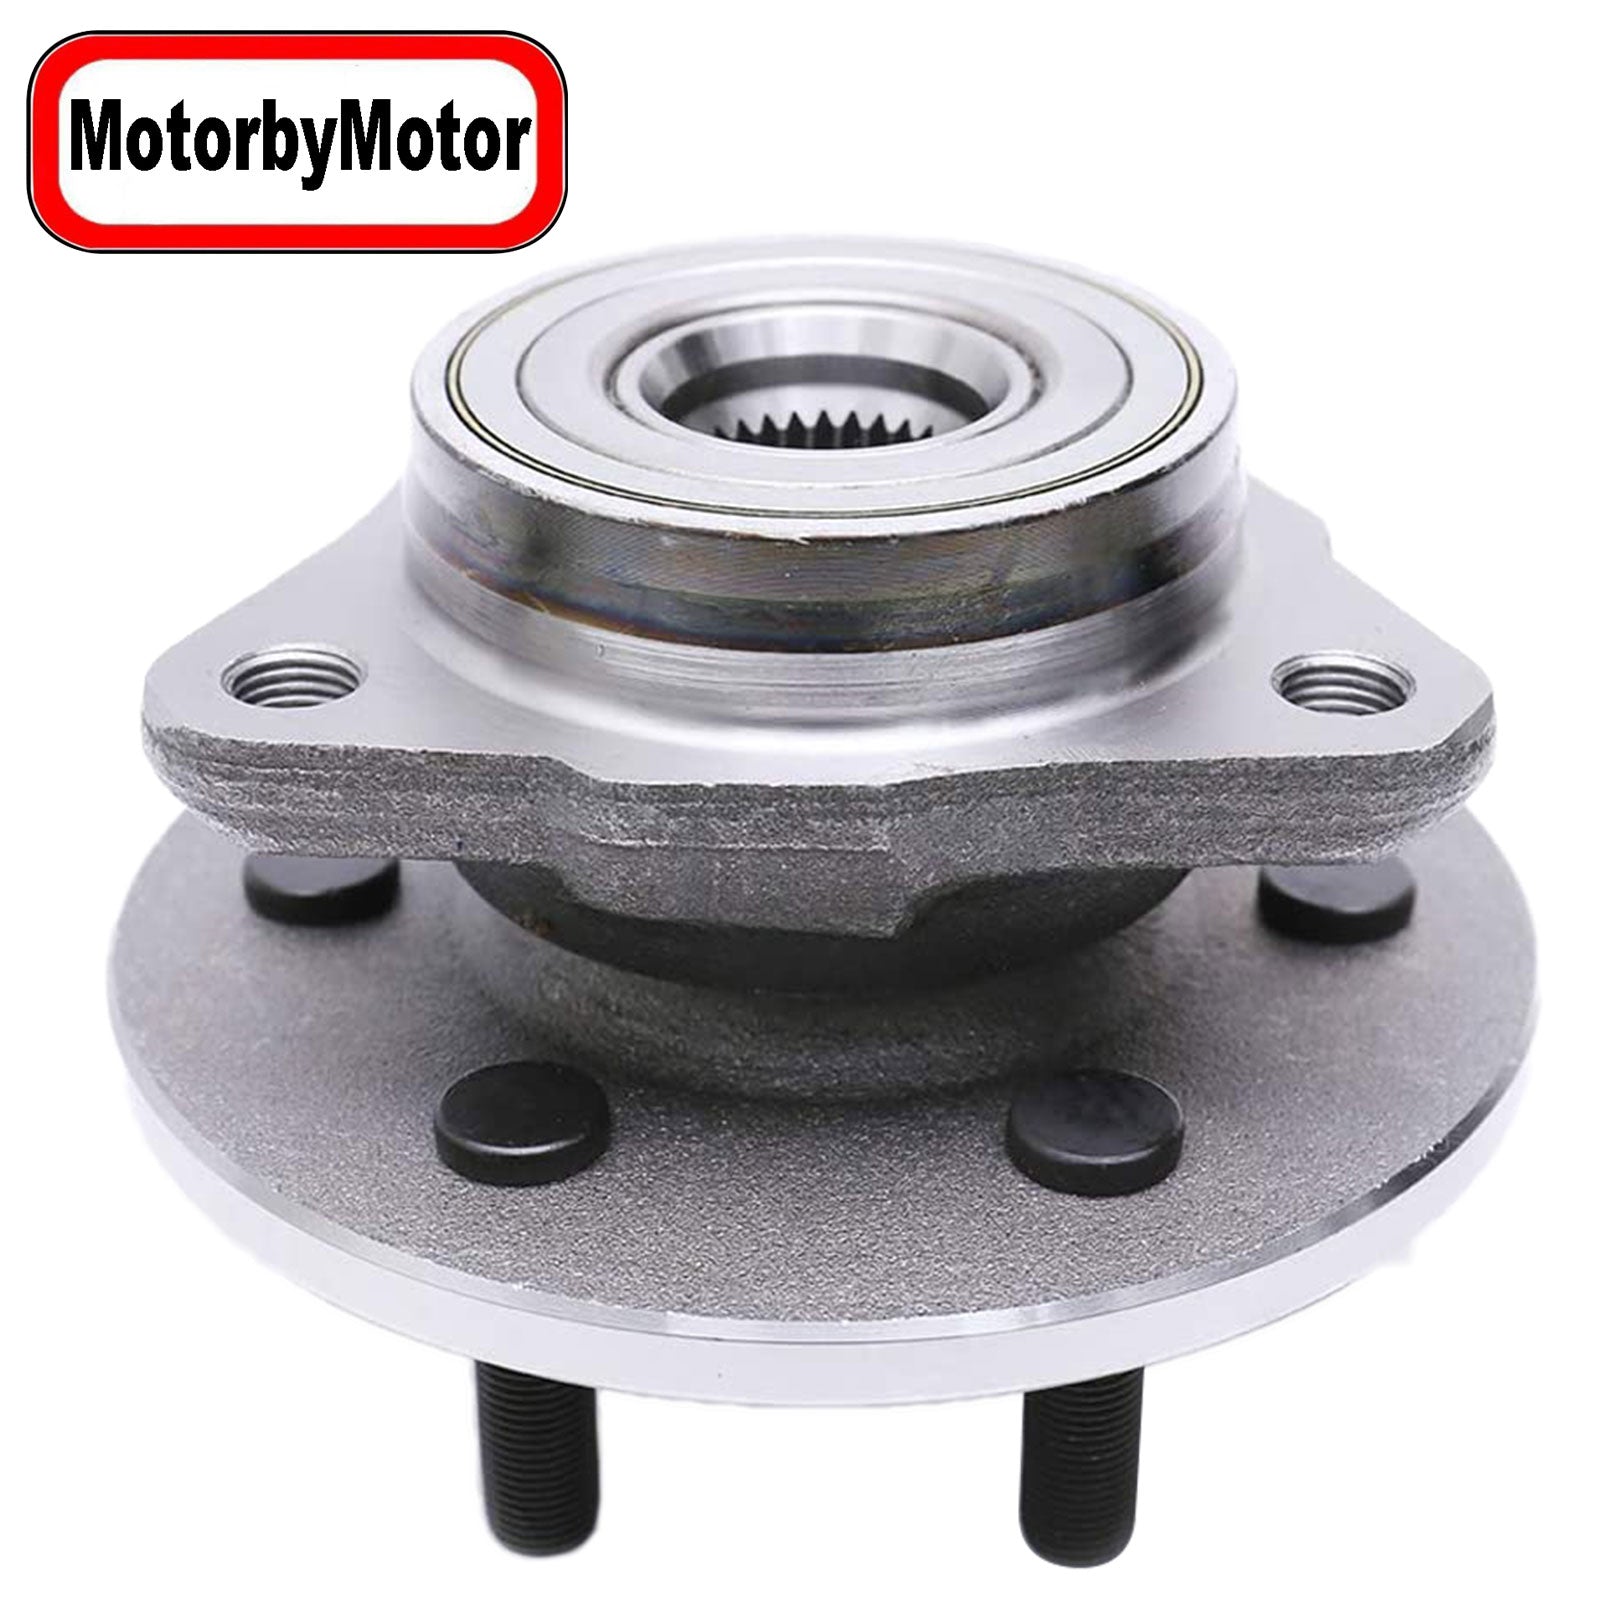 MotorbyMotor 515007 Front Wheel Bearing and Hub Assembly 4WD with 6 Lugs Fits for Dodge Durango Dakota Low-Runout OE Directly Replacement Hub Bearing (4x4) MotorbyMotor